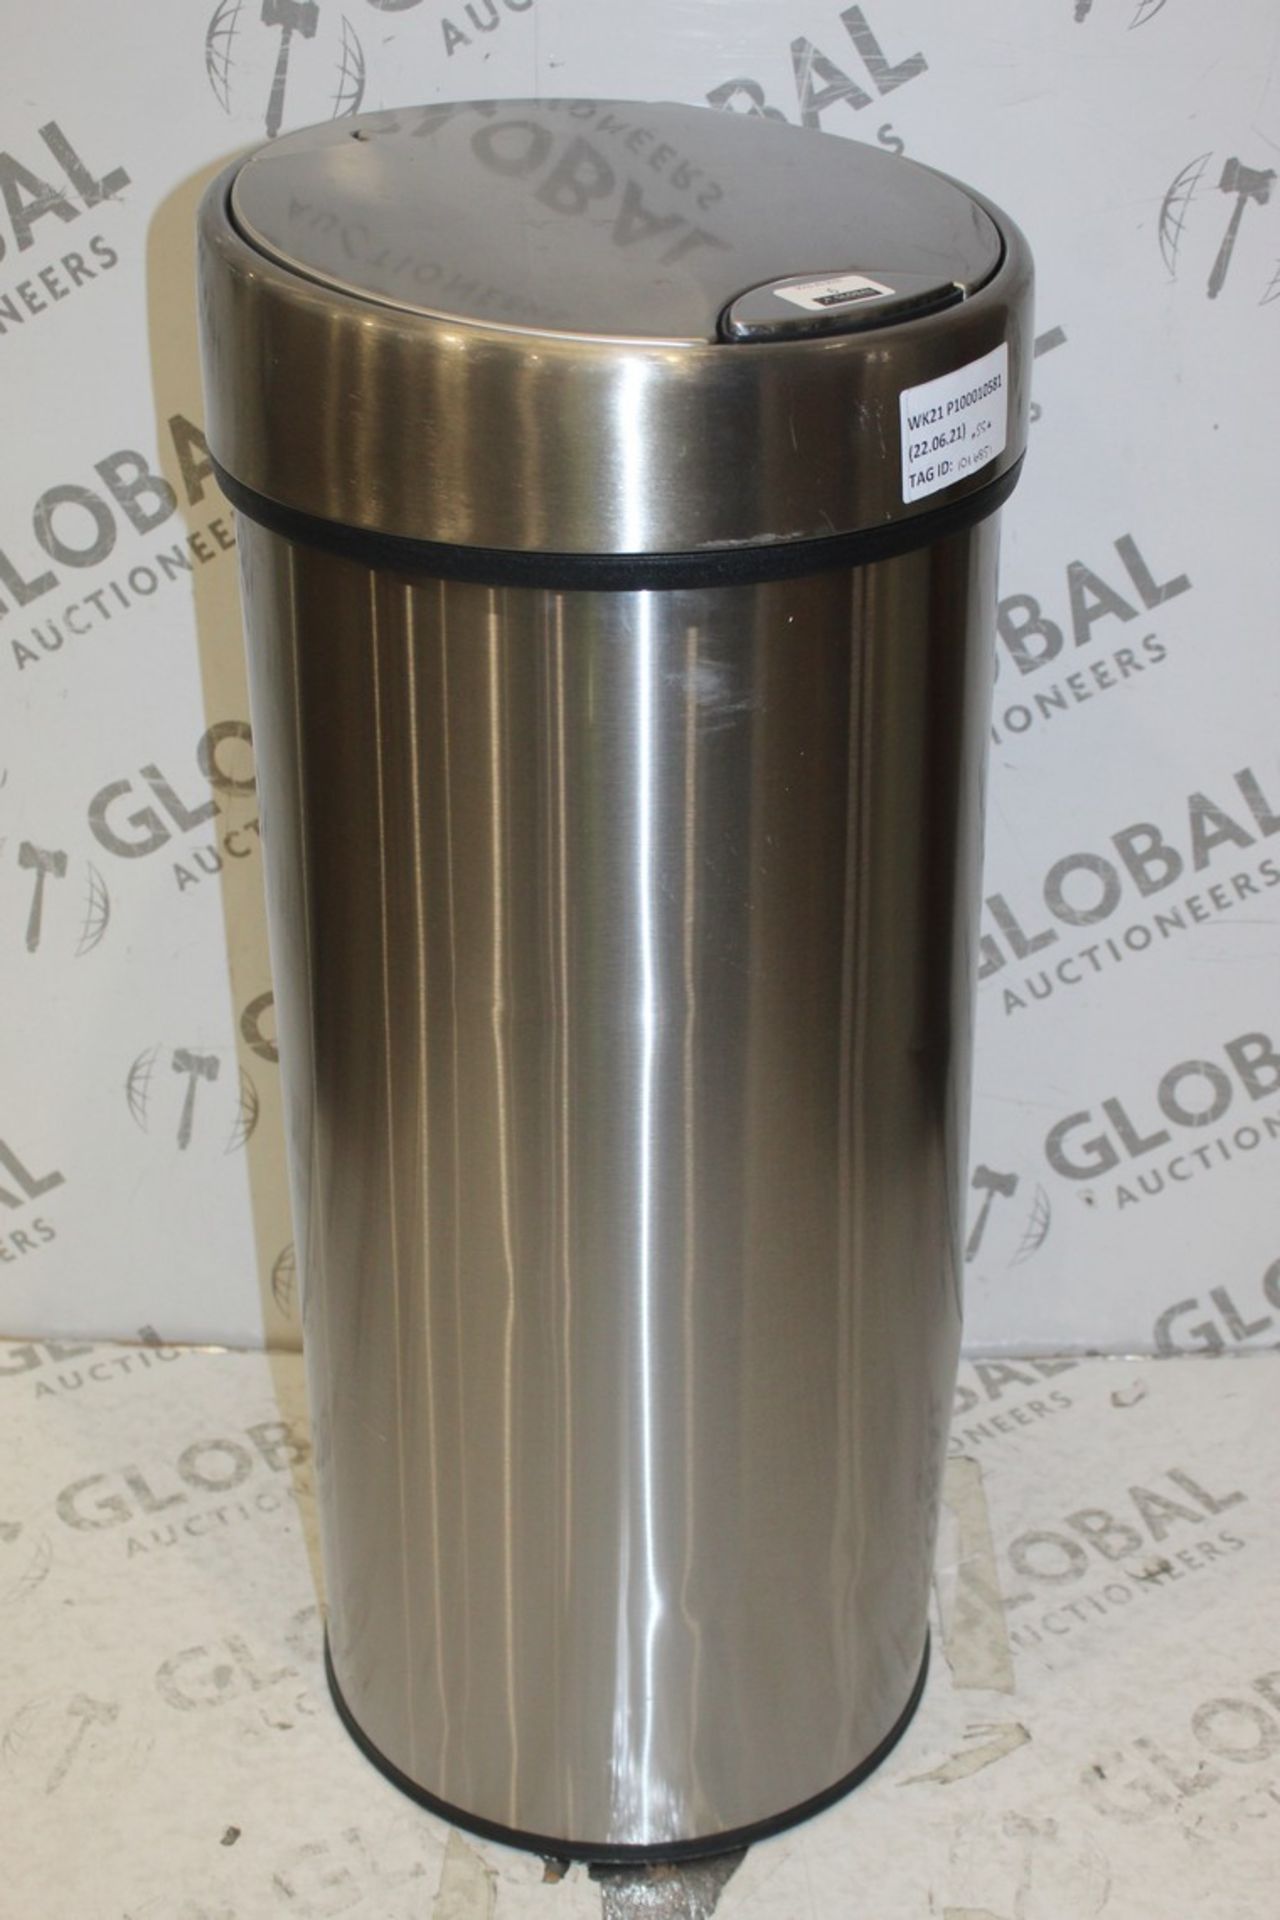 John Lewis & Partners Stainless Steel 30 Litre Touch Bin RRP £55 (1016851) (Pictures Are For